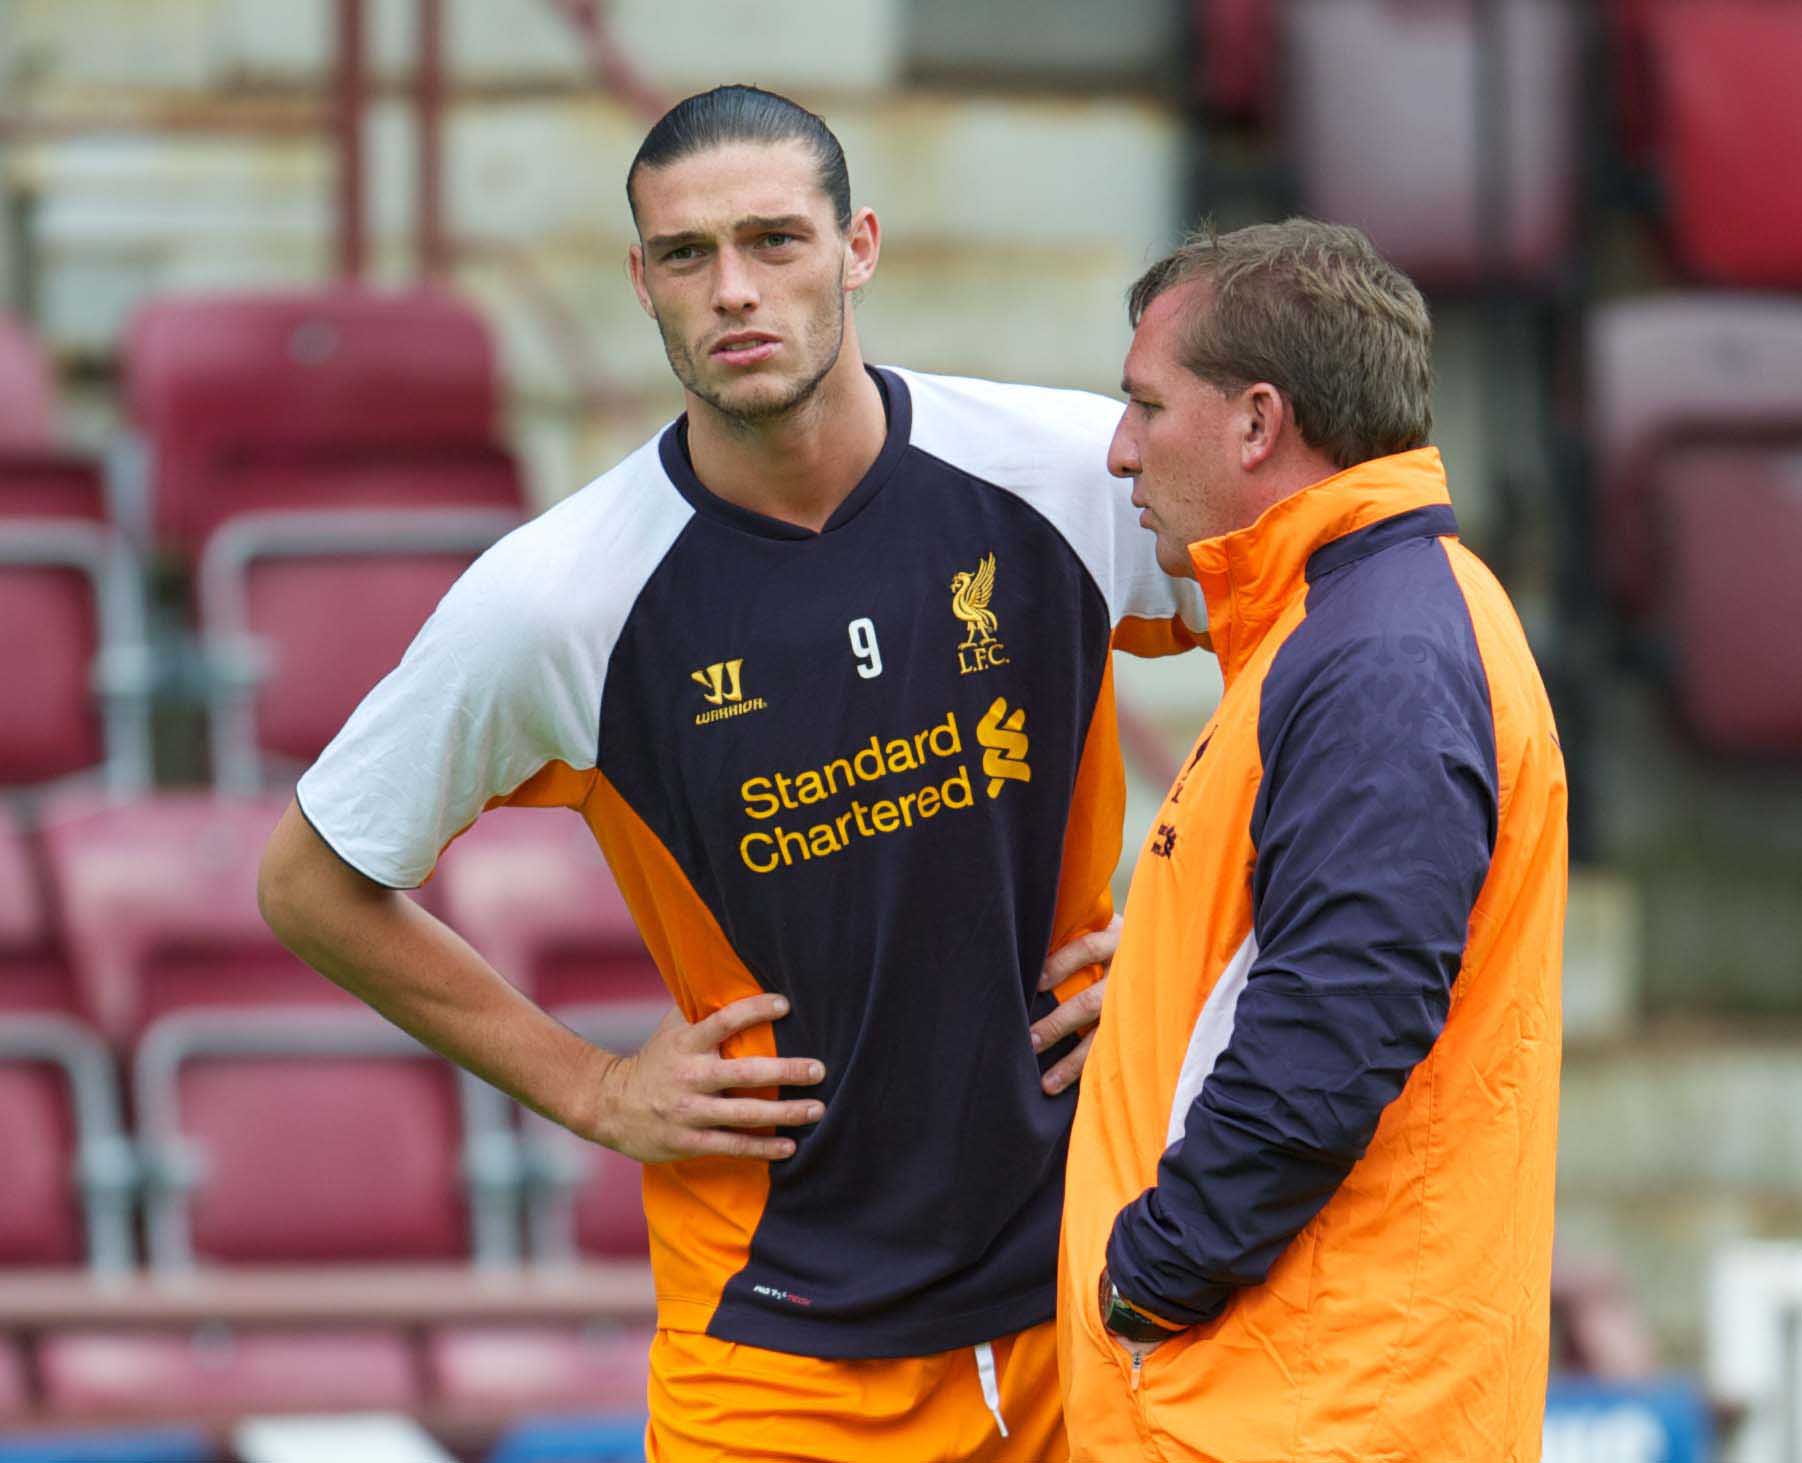 BRENDAN RODGERS AND ANDY CARROLL: THE LYING GAME